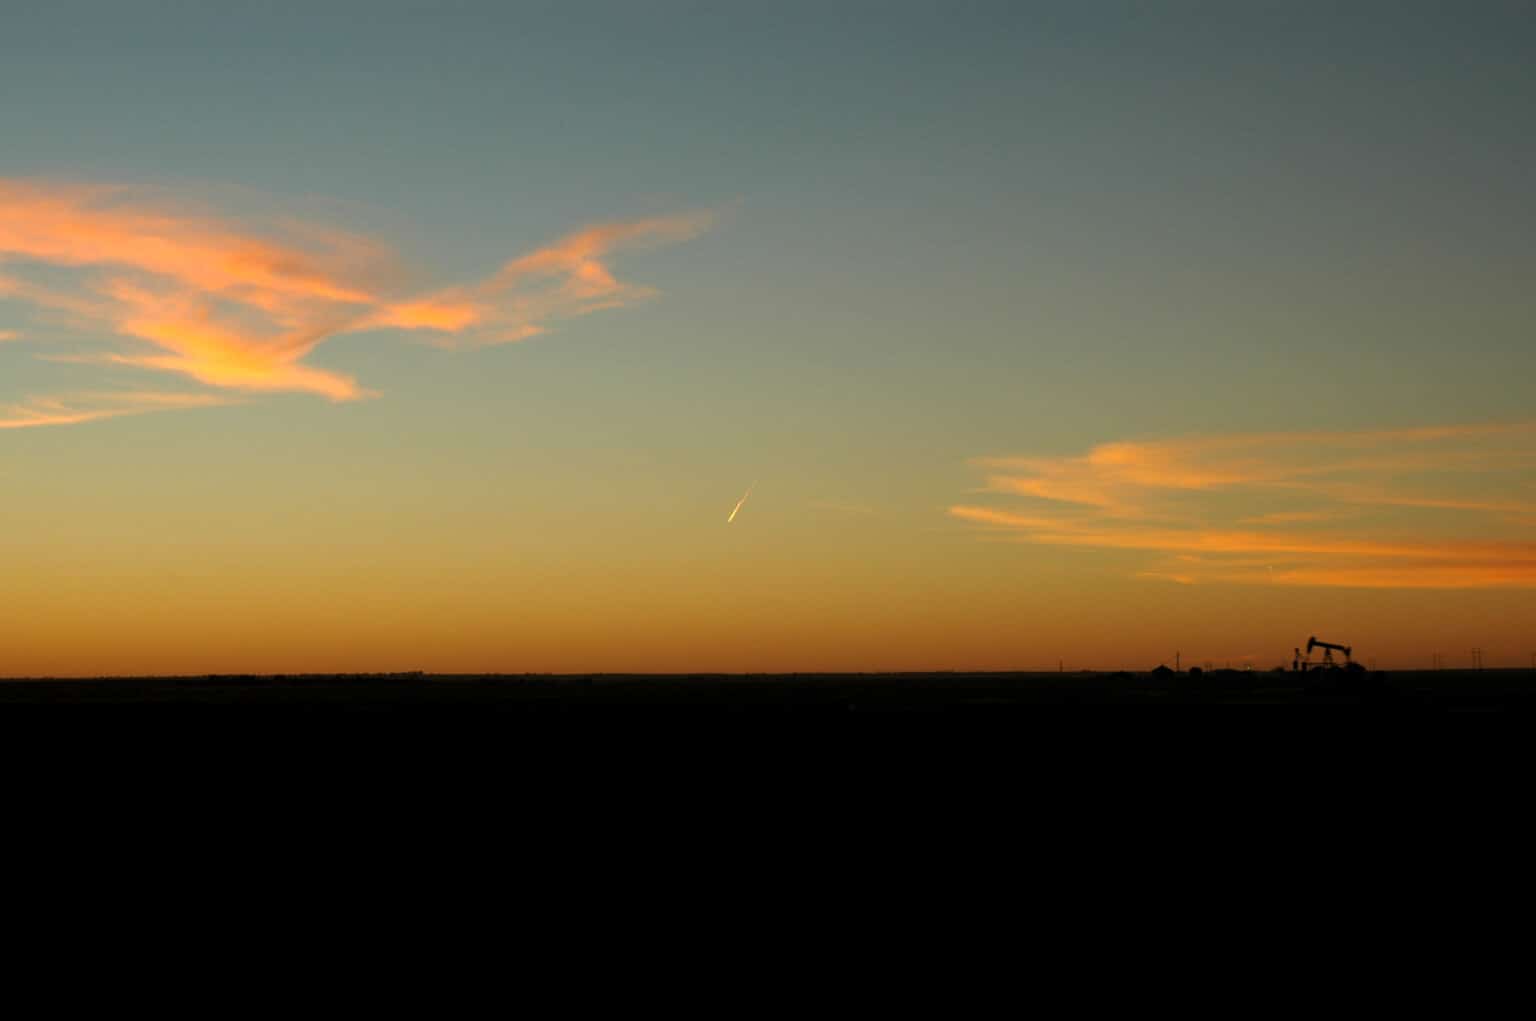 Oil pumpjack in the distance at sunset in a flat plain